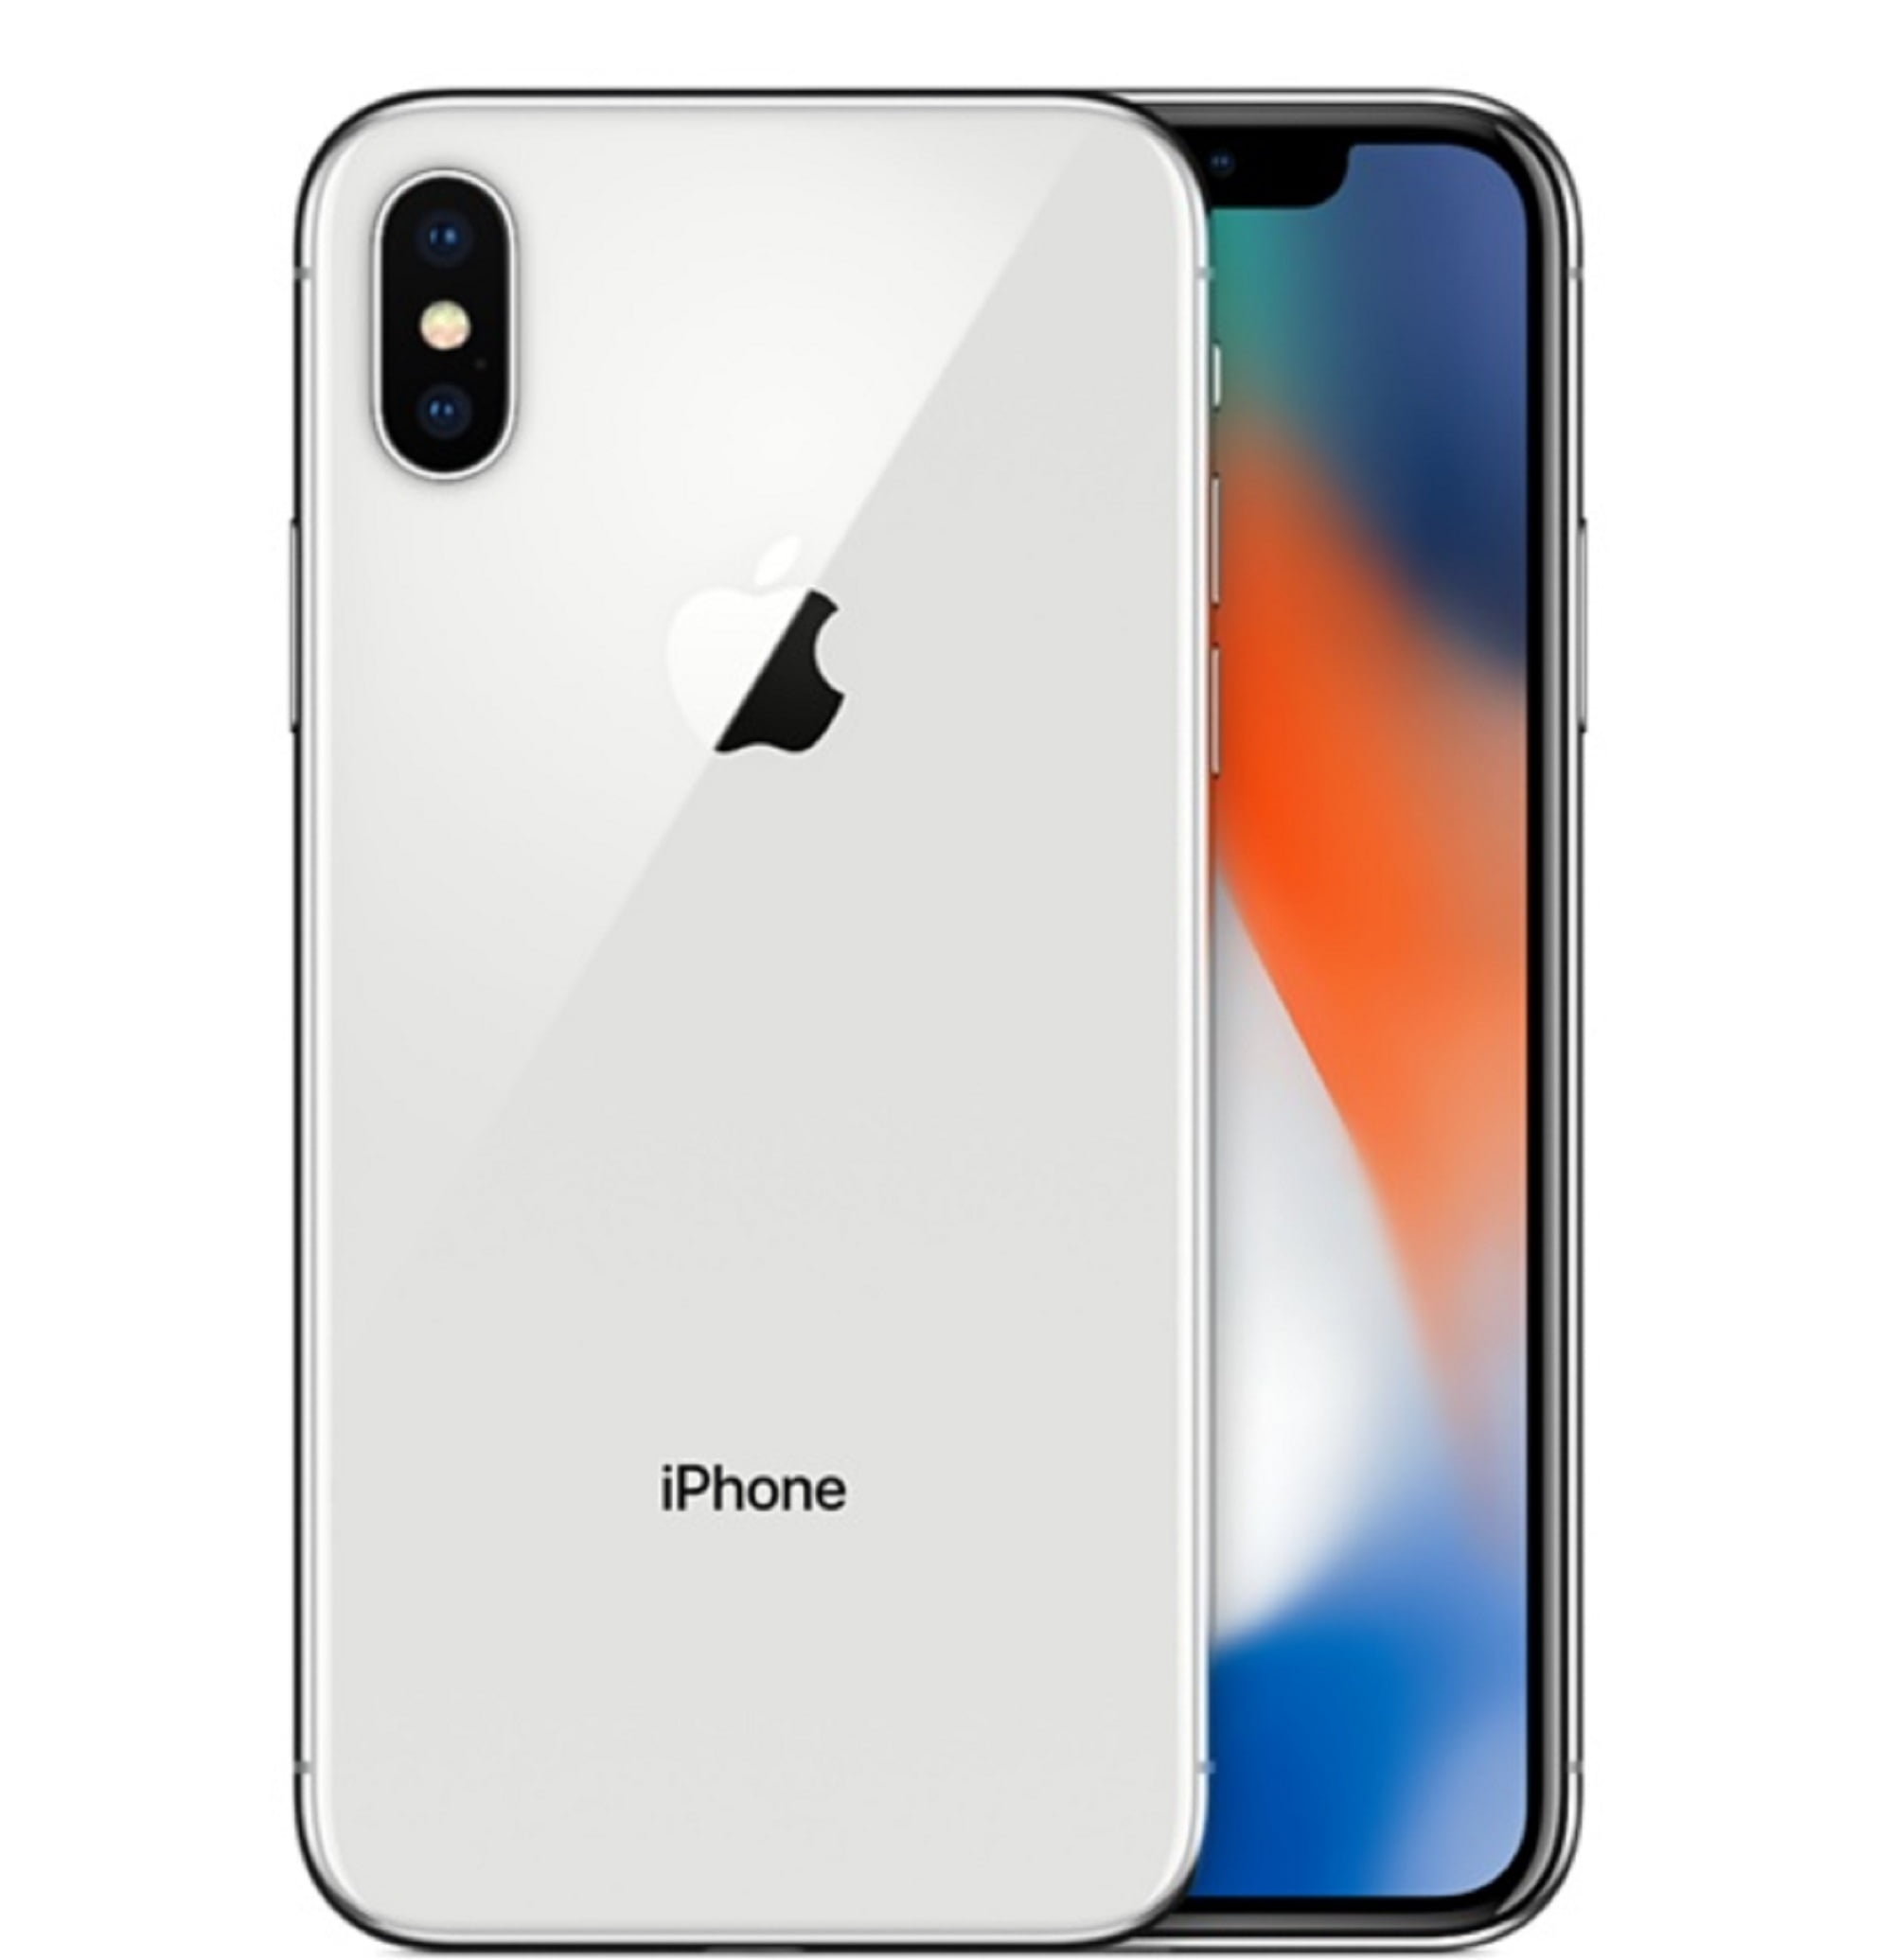 Apple iPhone X 64 GB in East Legon - Mobile Phones, Lymit Whan